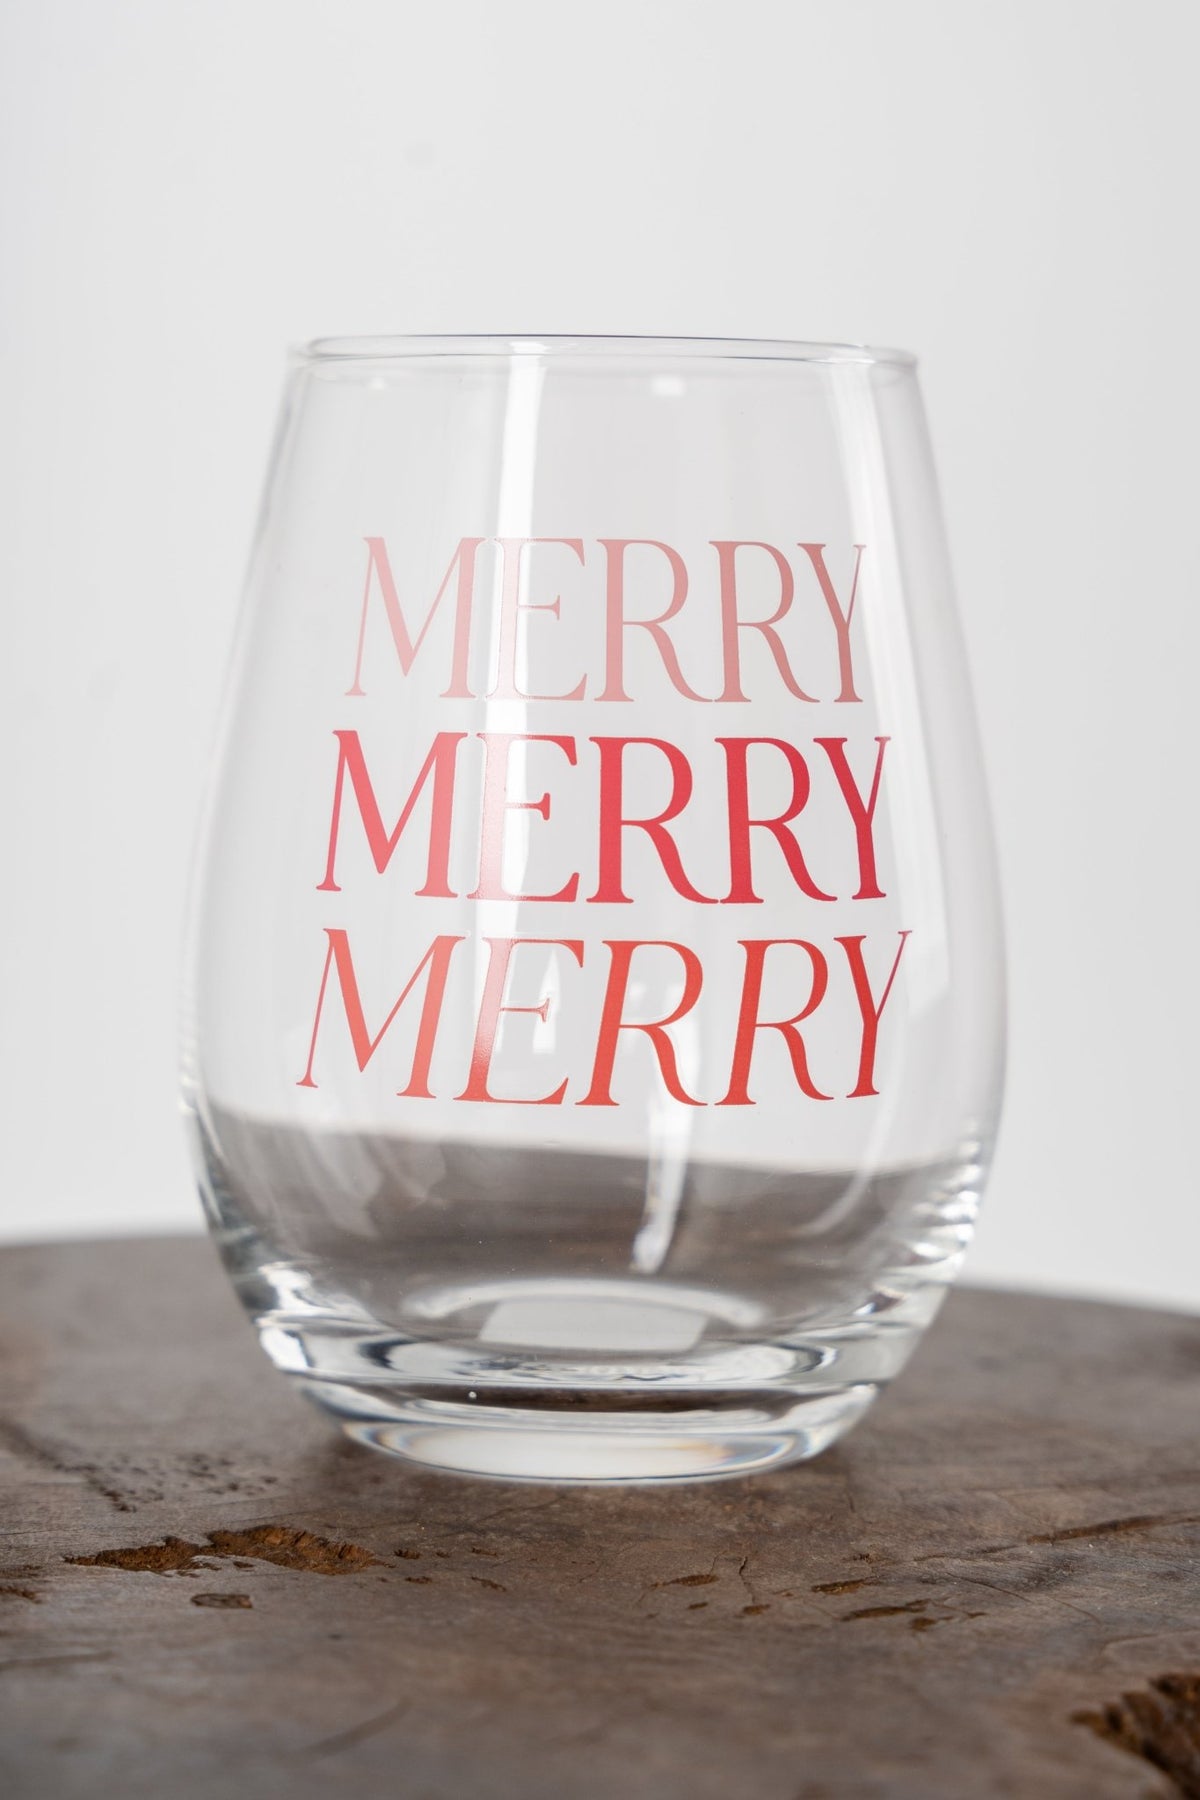 Merry Merry Merry 20 ounce stemless wine glass - Trendy Holiday Apparel at Lush Fashion Lounge Boutique in Oklahoma City